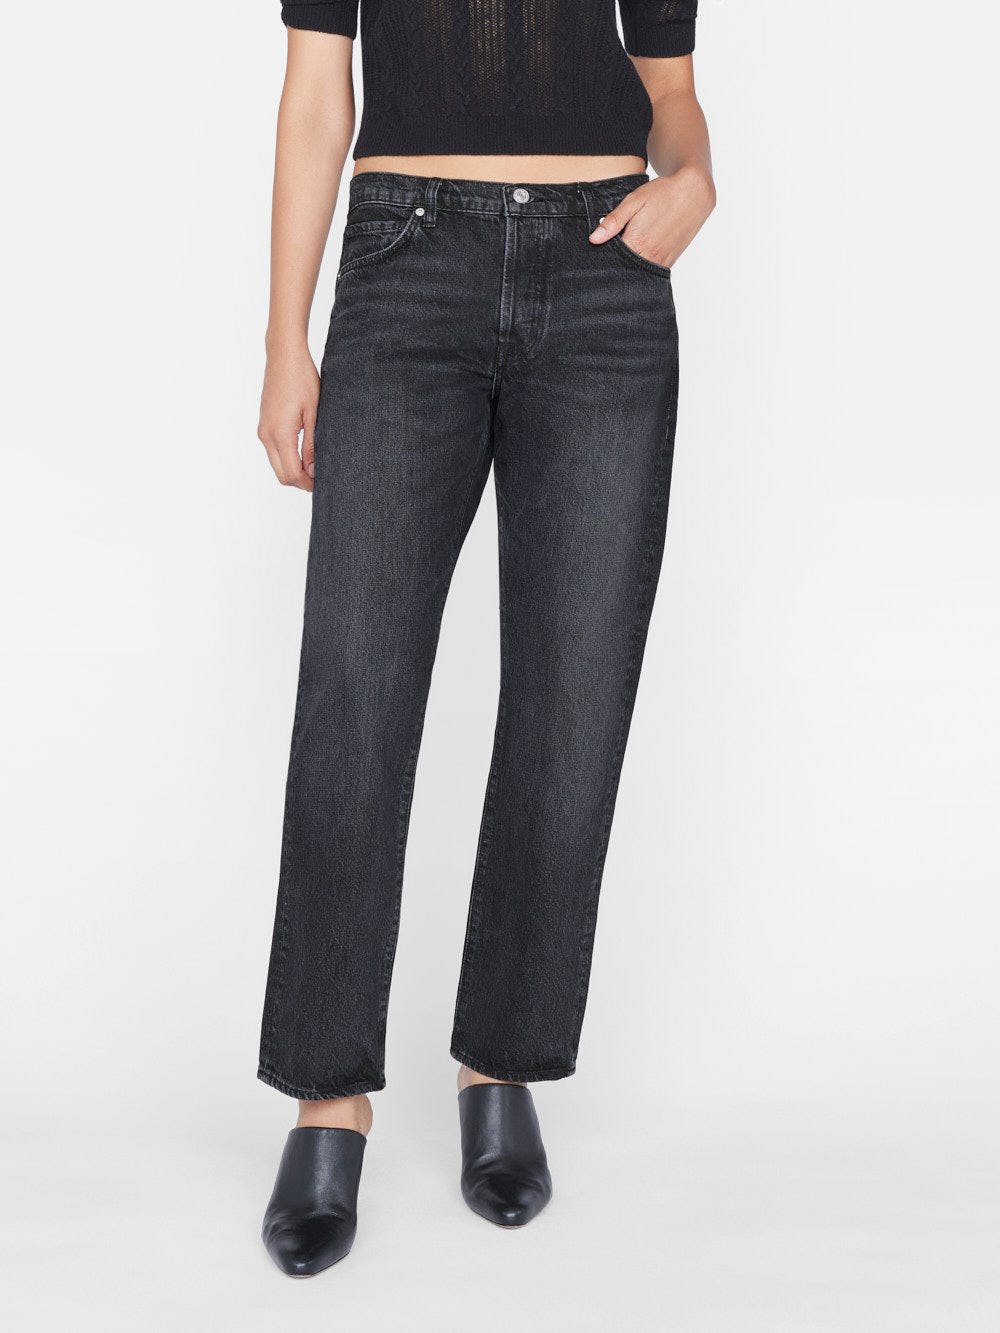 A woman wearing sustainable denim, Frame - Le Slouch Pompei jeans.